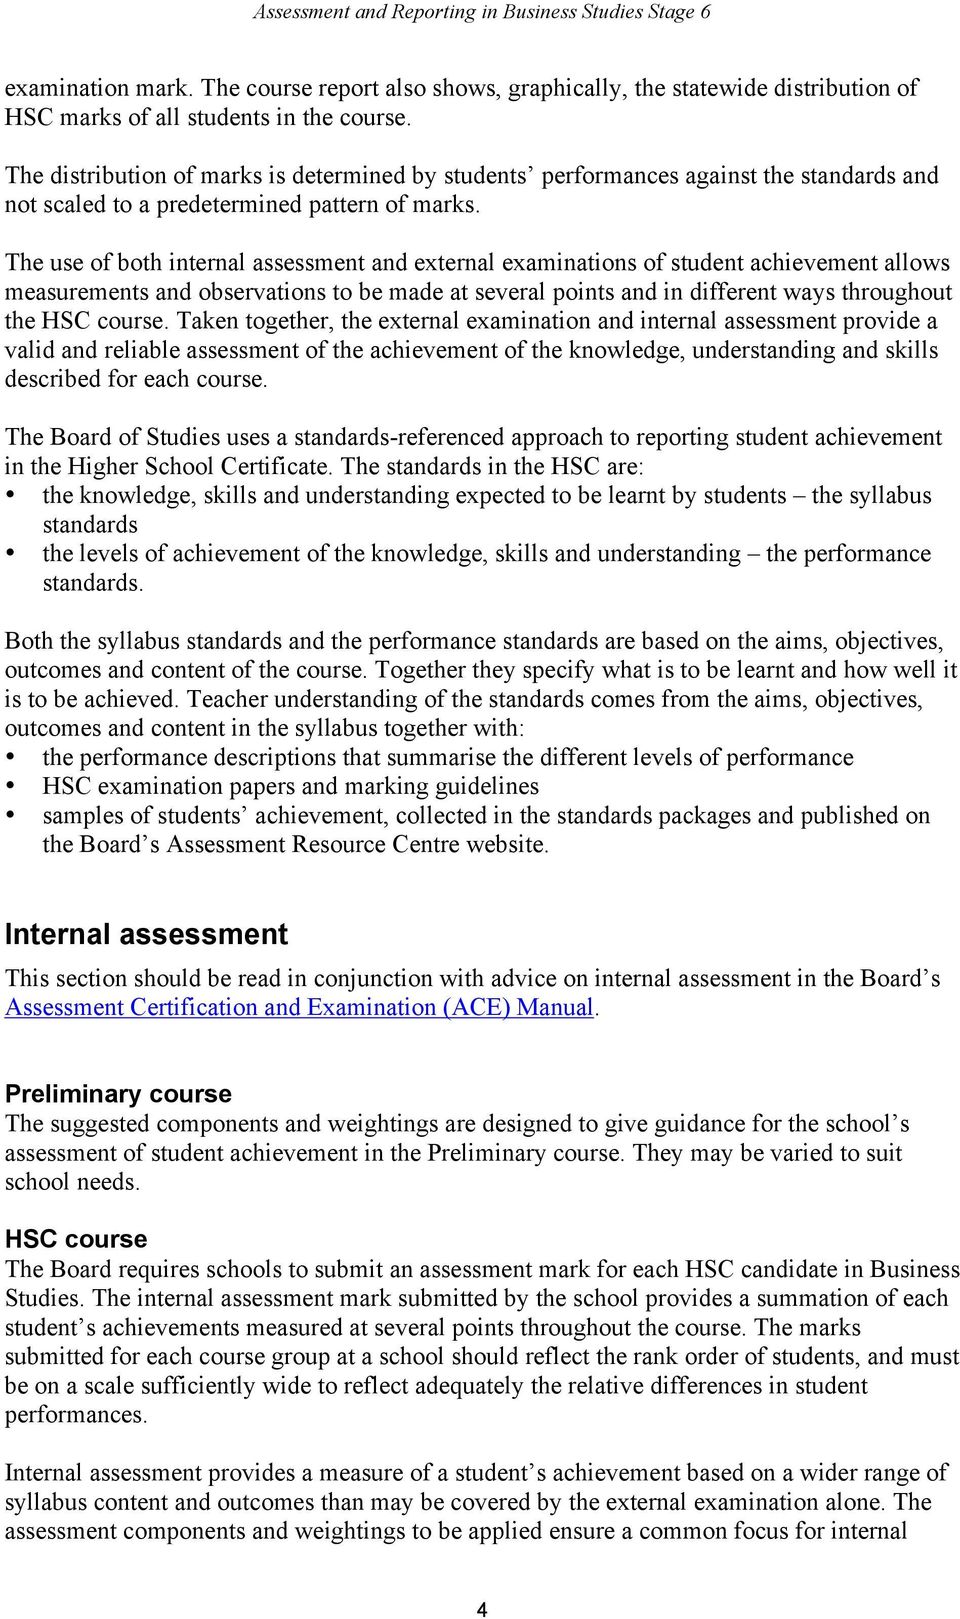 The use of both internal assessment and external examinations of student achievement allows measurements and observations to be made at several points and in different ways throughout the HSC course.